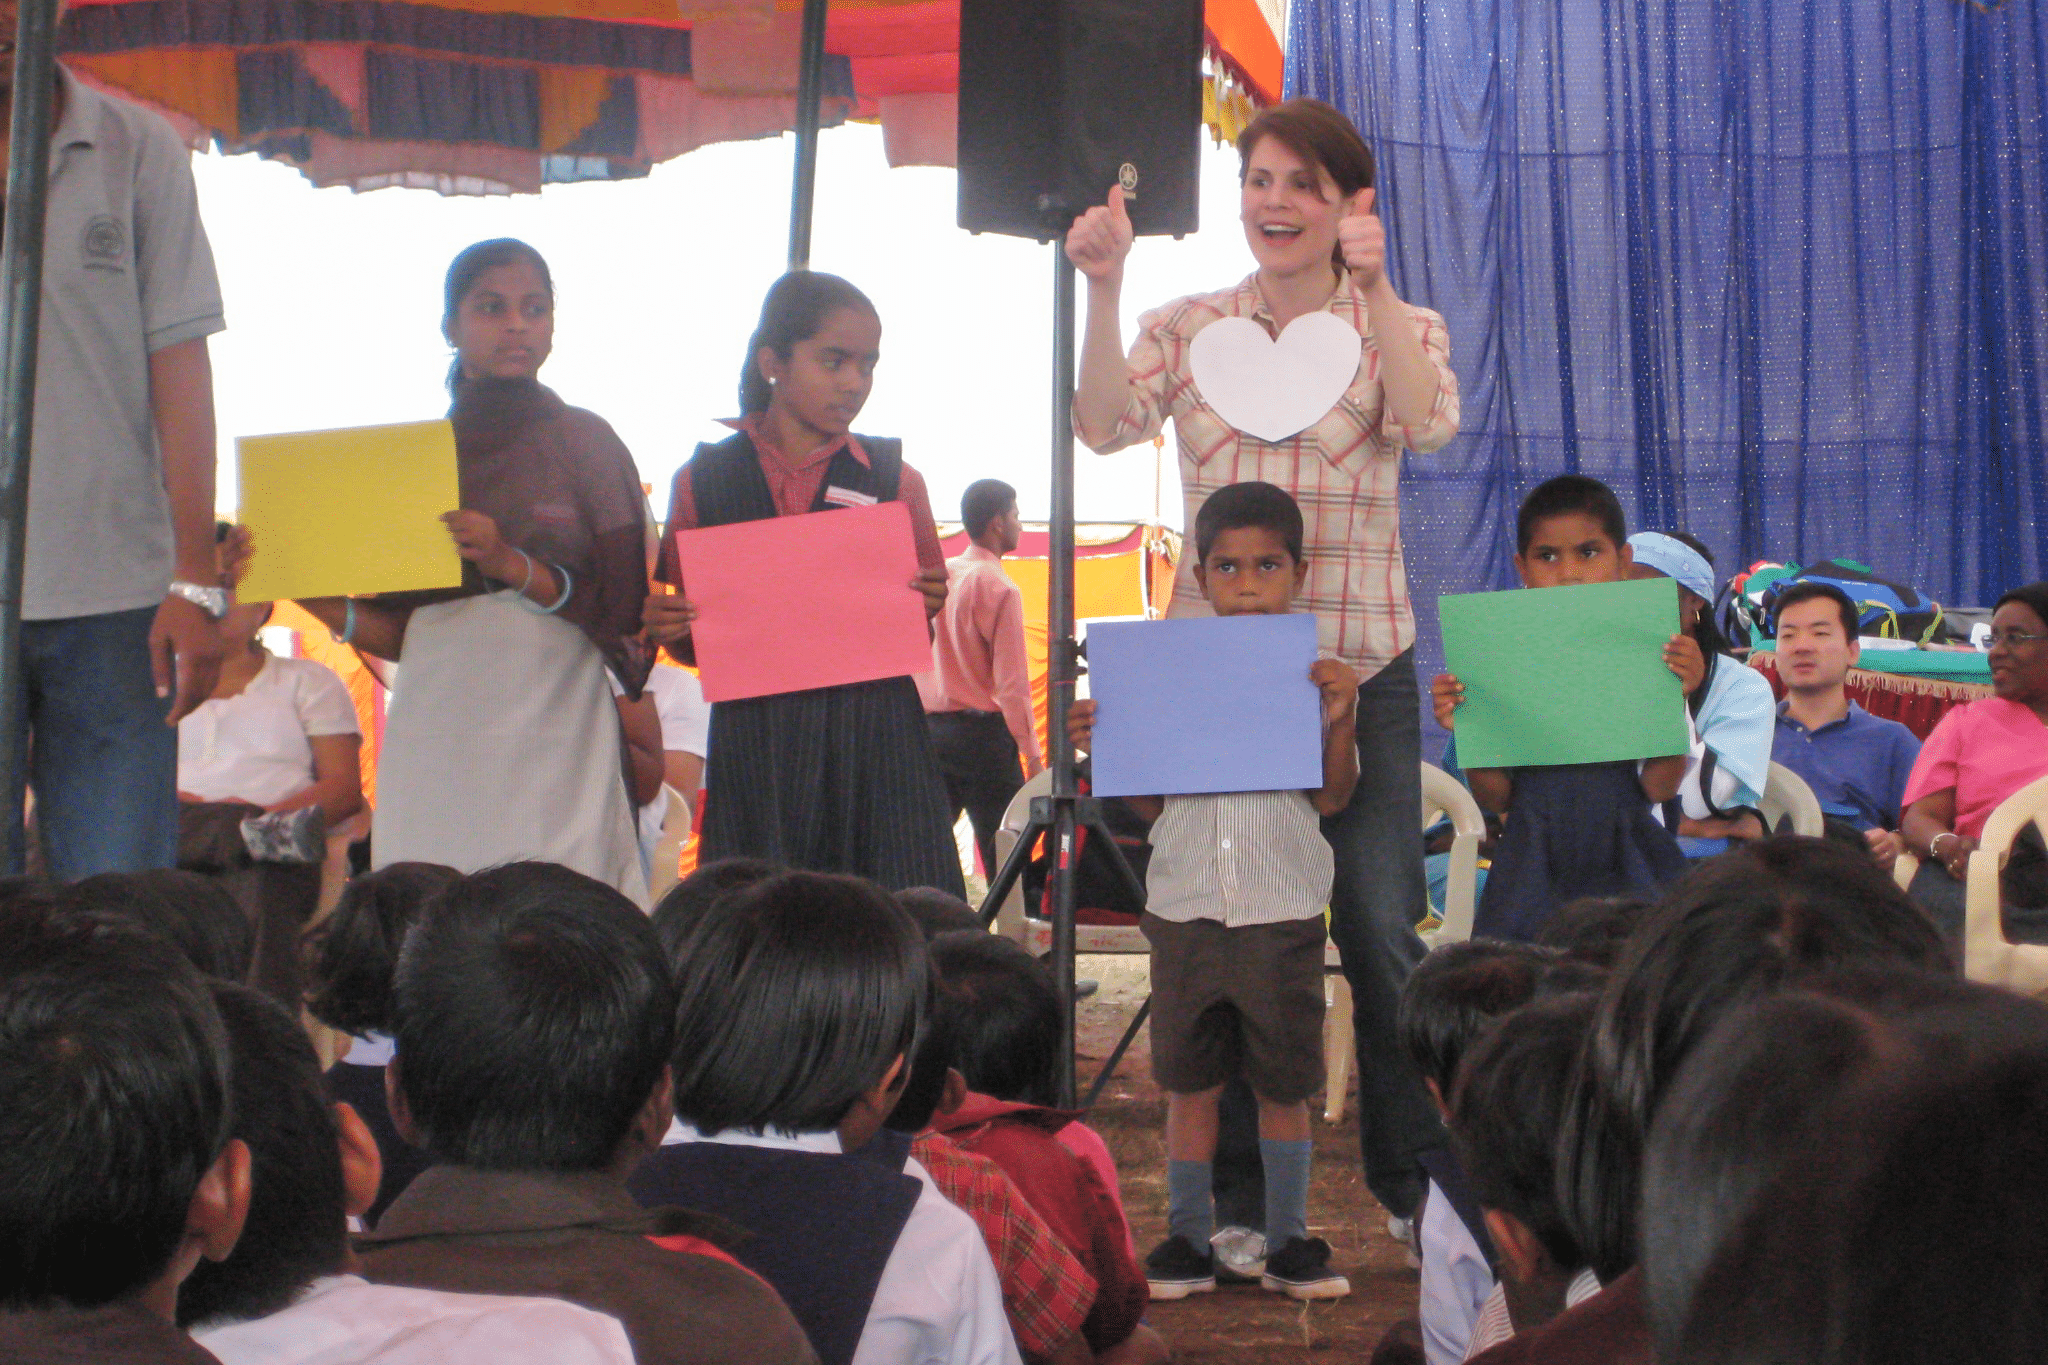 kids on stage performing, woman thumbs ups